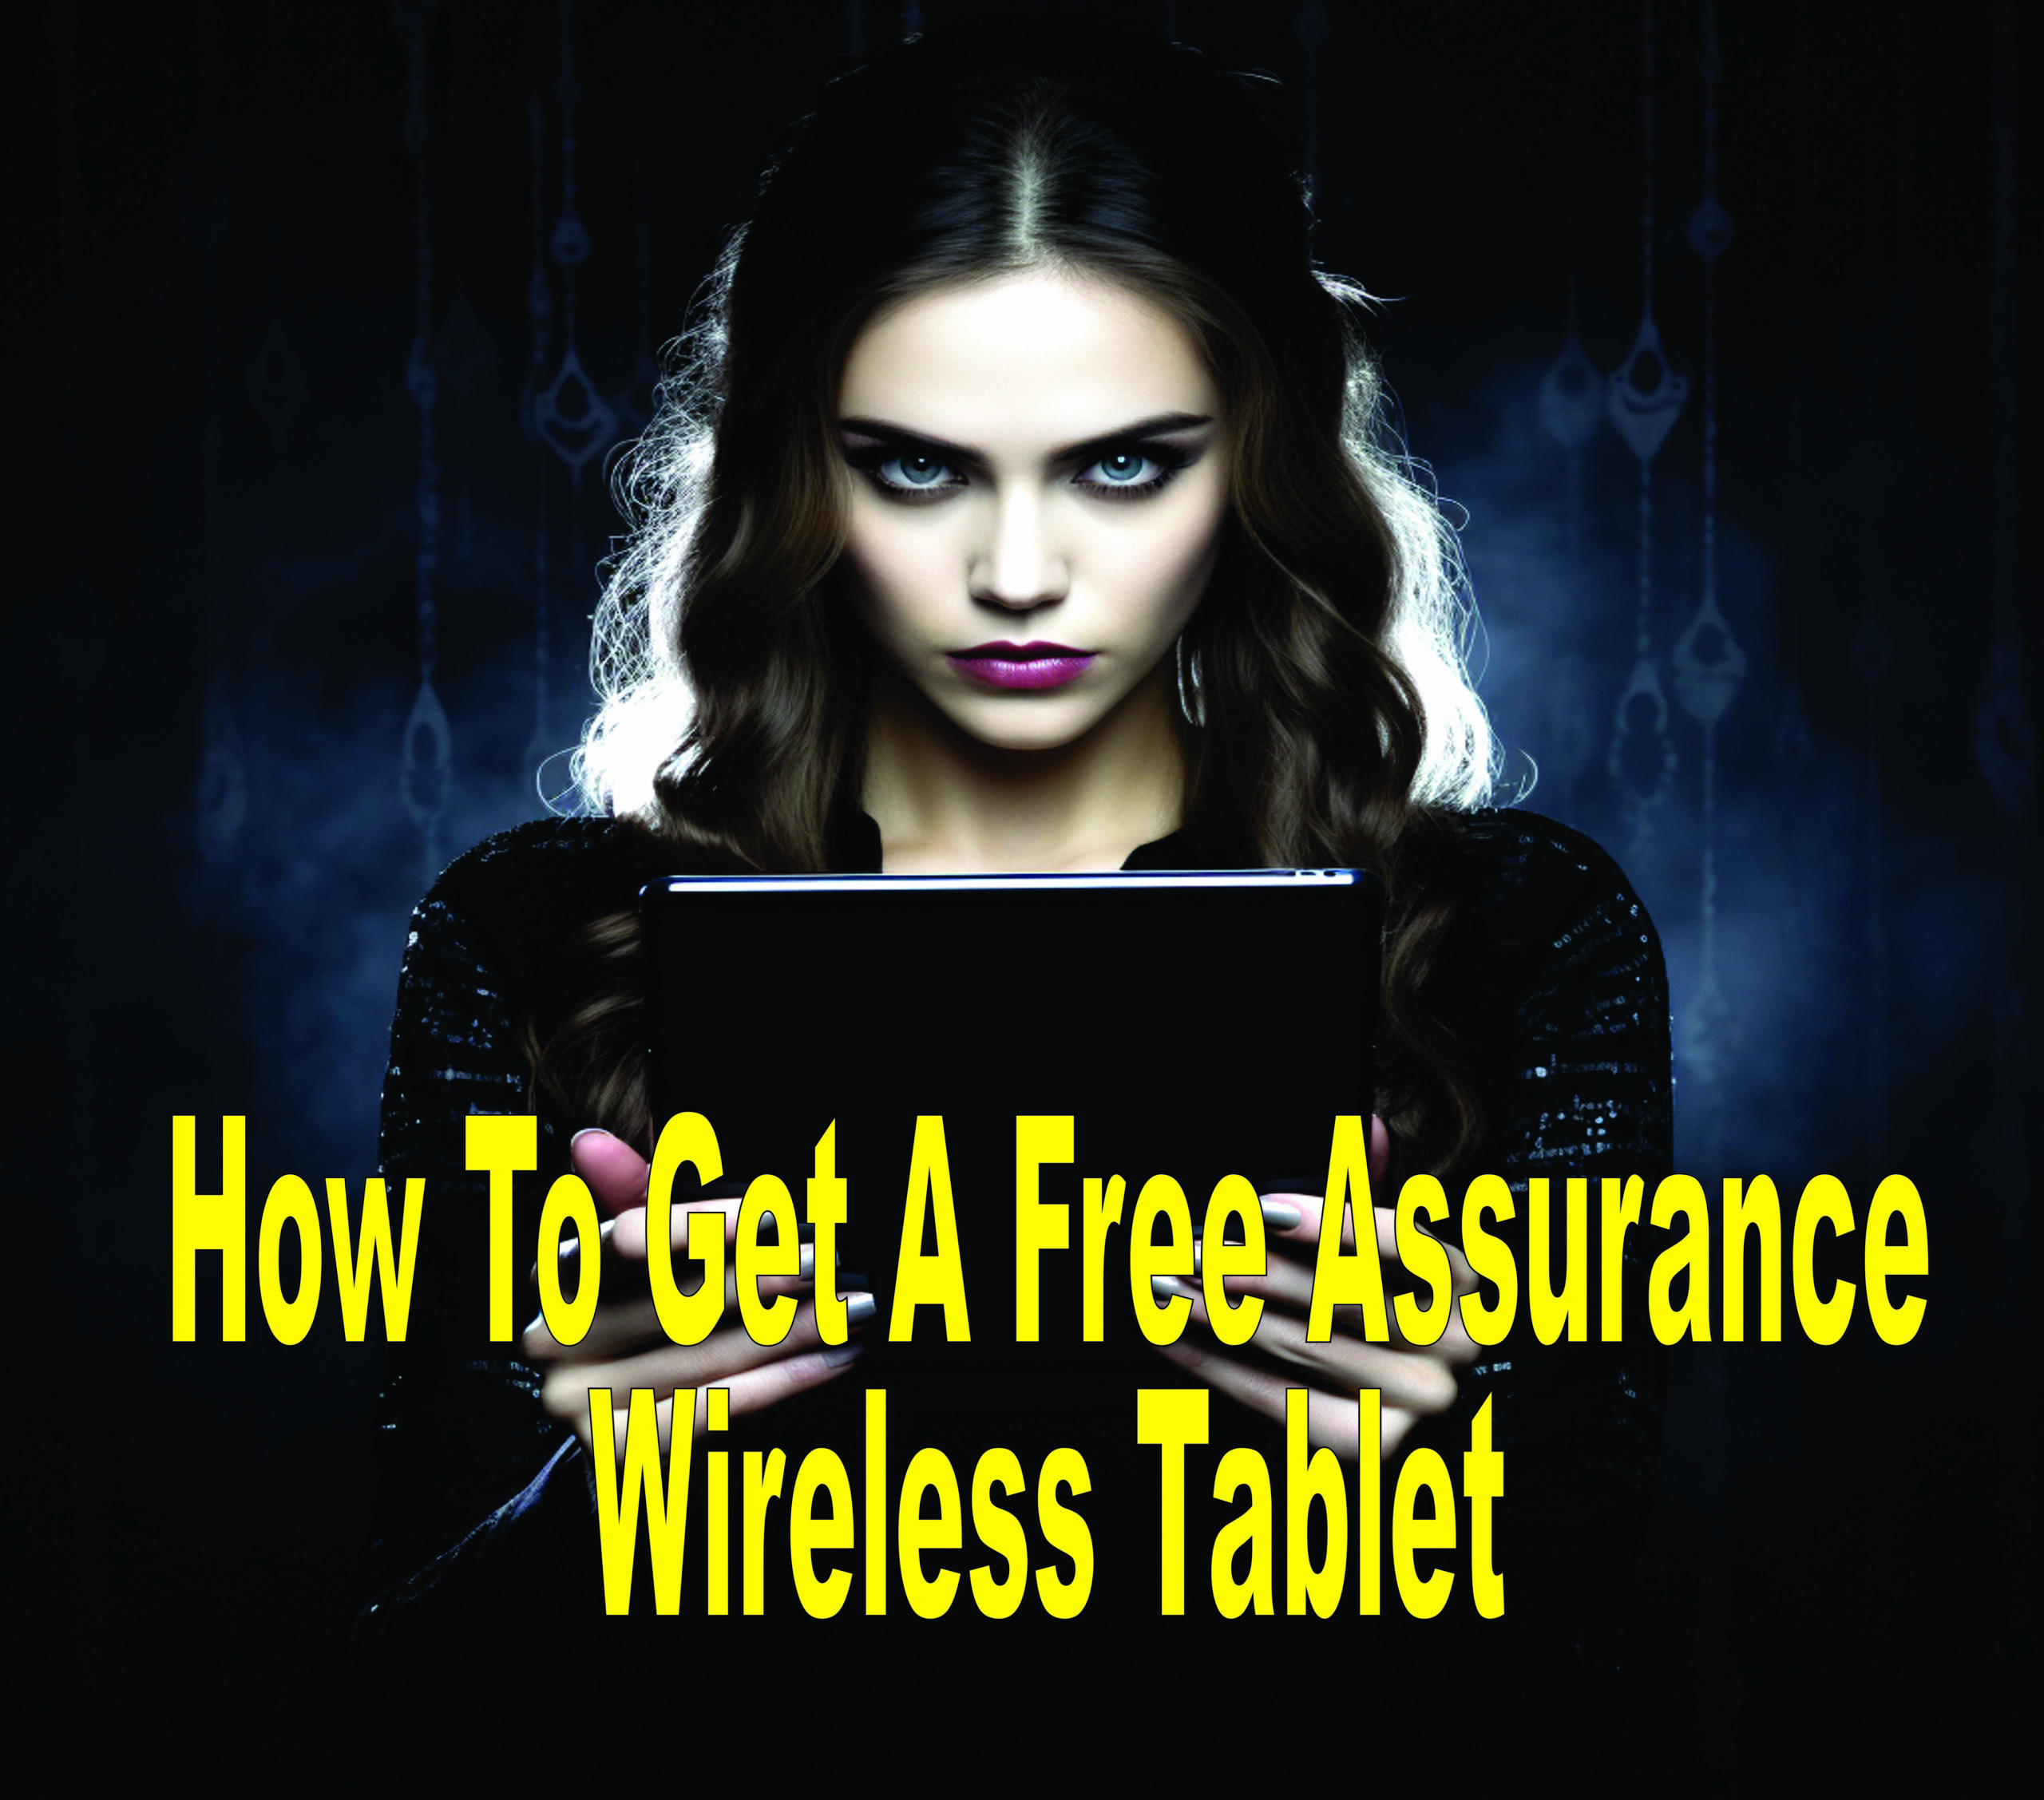 How To Get A Free Assurance Wireless Tablet